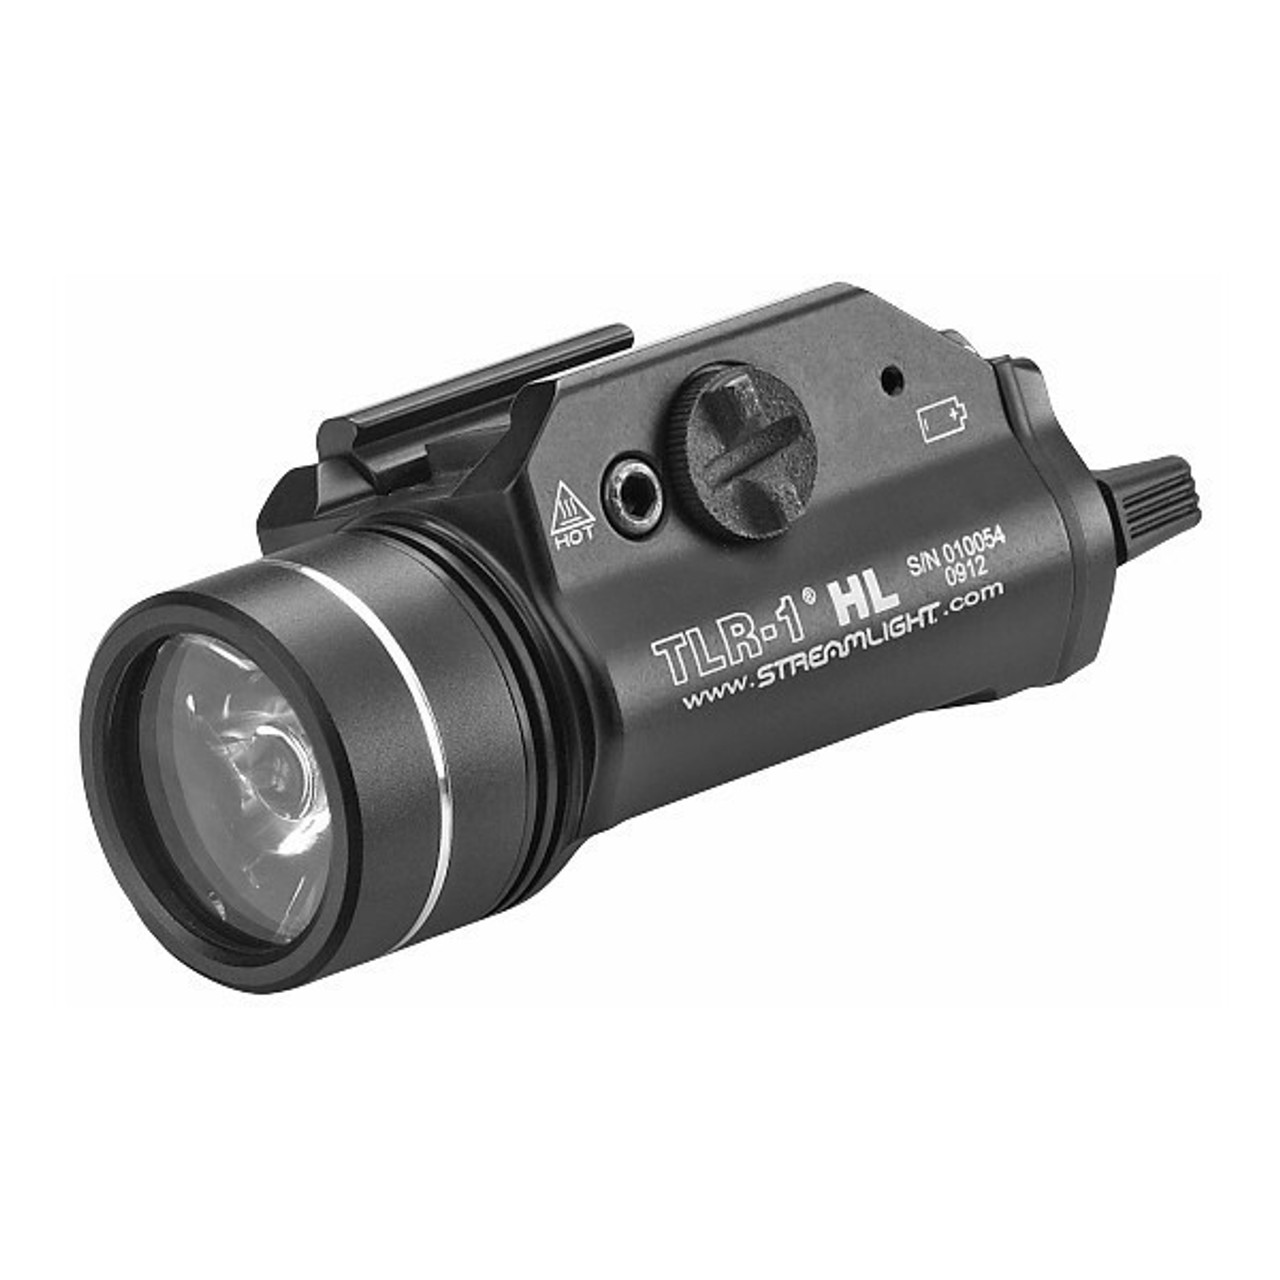 69889 Streamlight TLR-1 HL 2 x CR123A LED Tactical Weapon Light w 1000 Lumens 